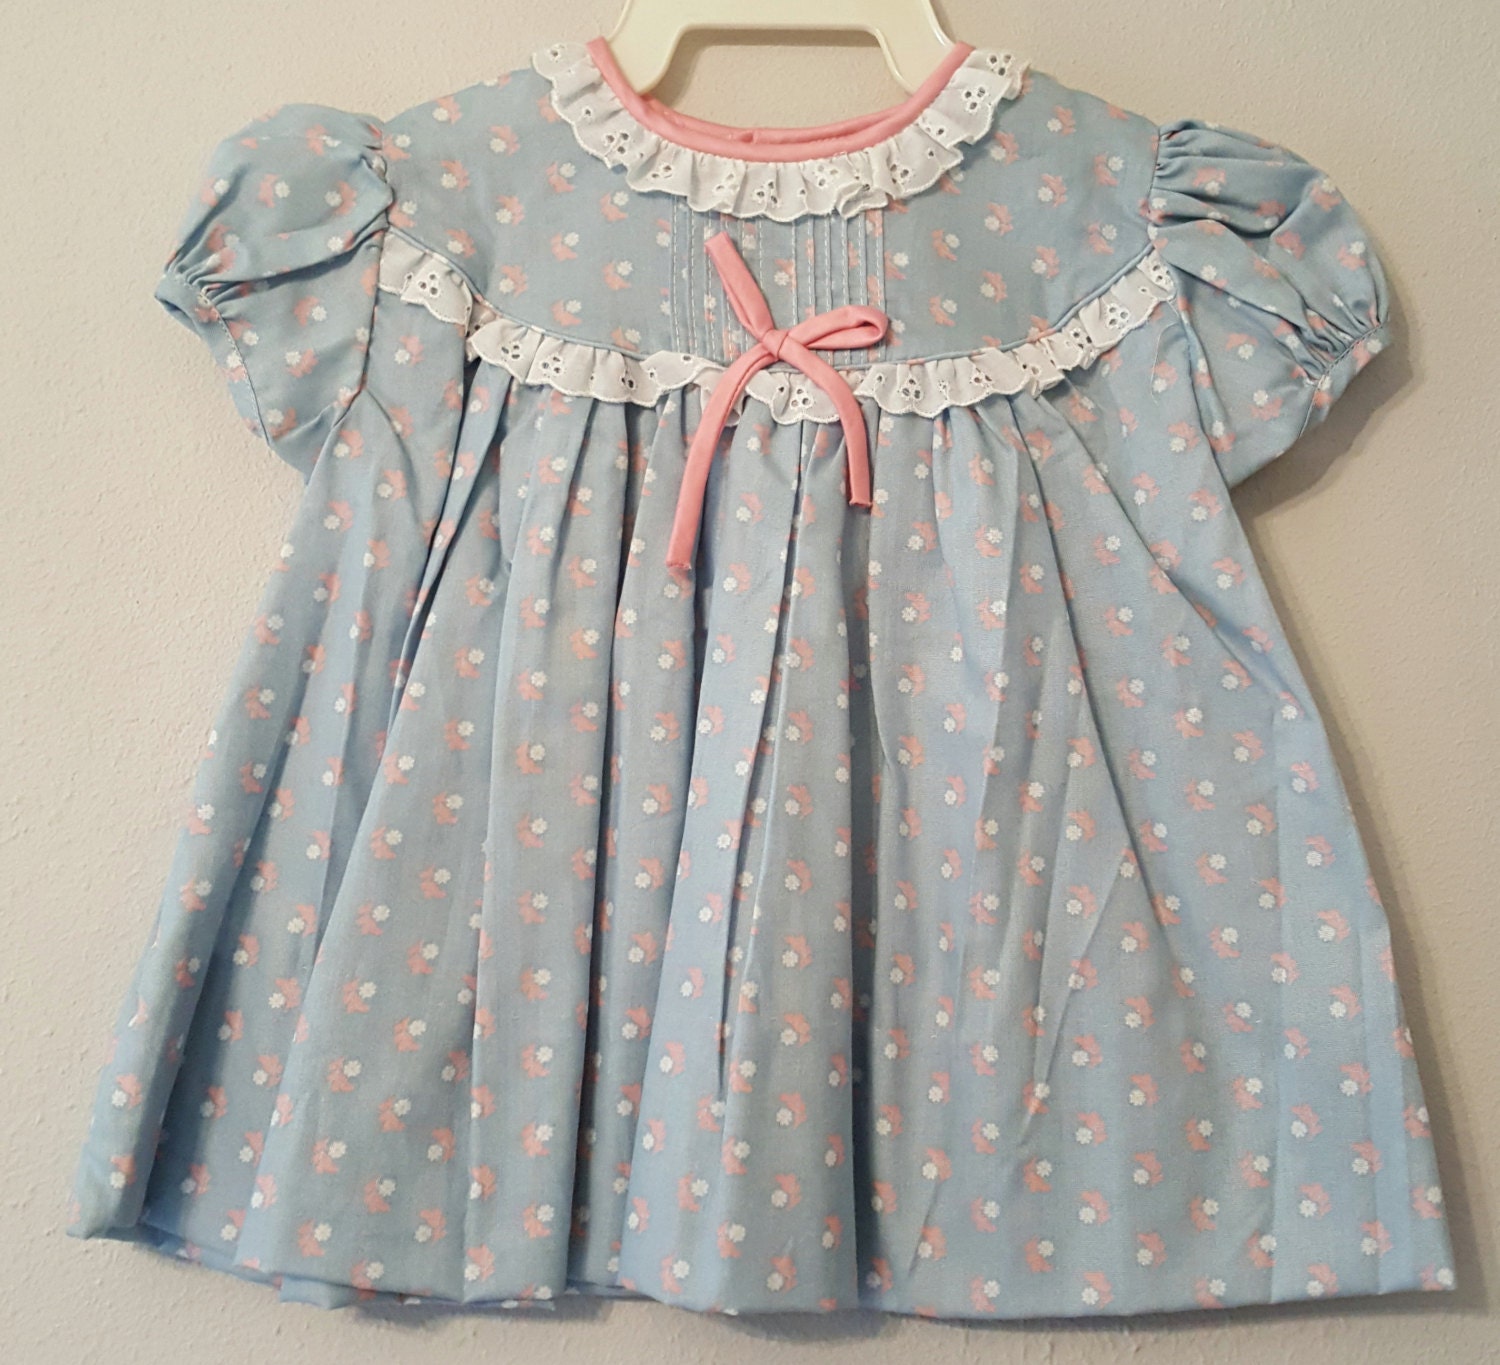 Vintage Girls Country Blue Floral Dress with Pink Bow by C.I. | Etsy